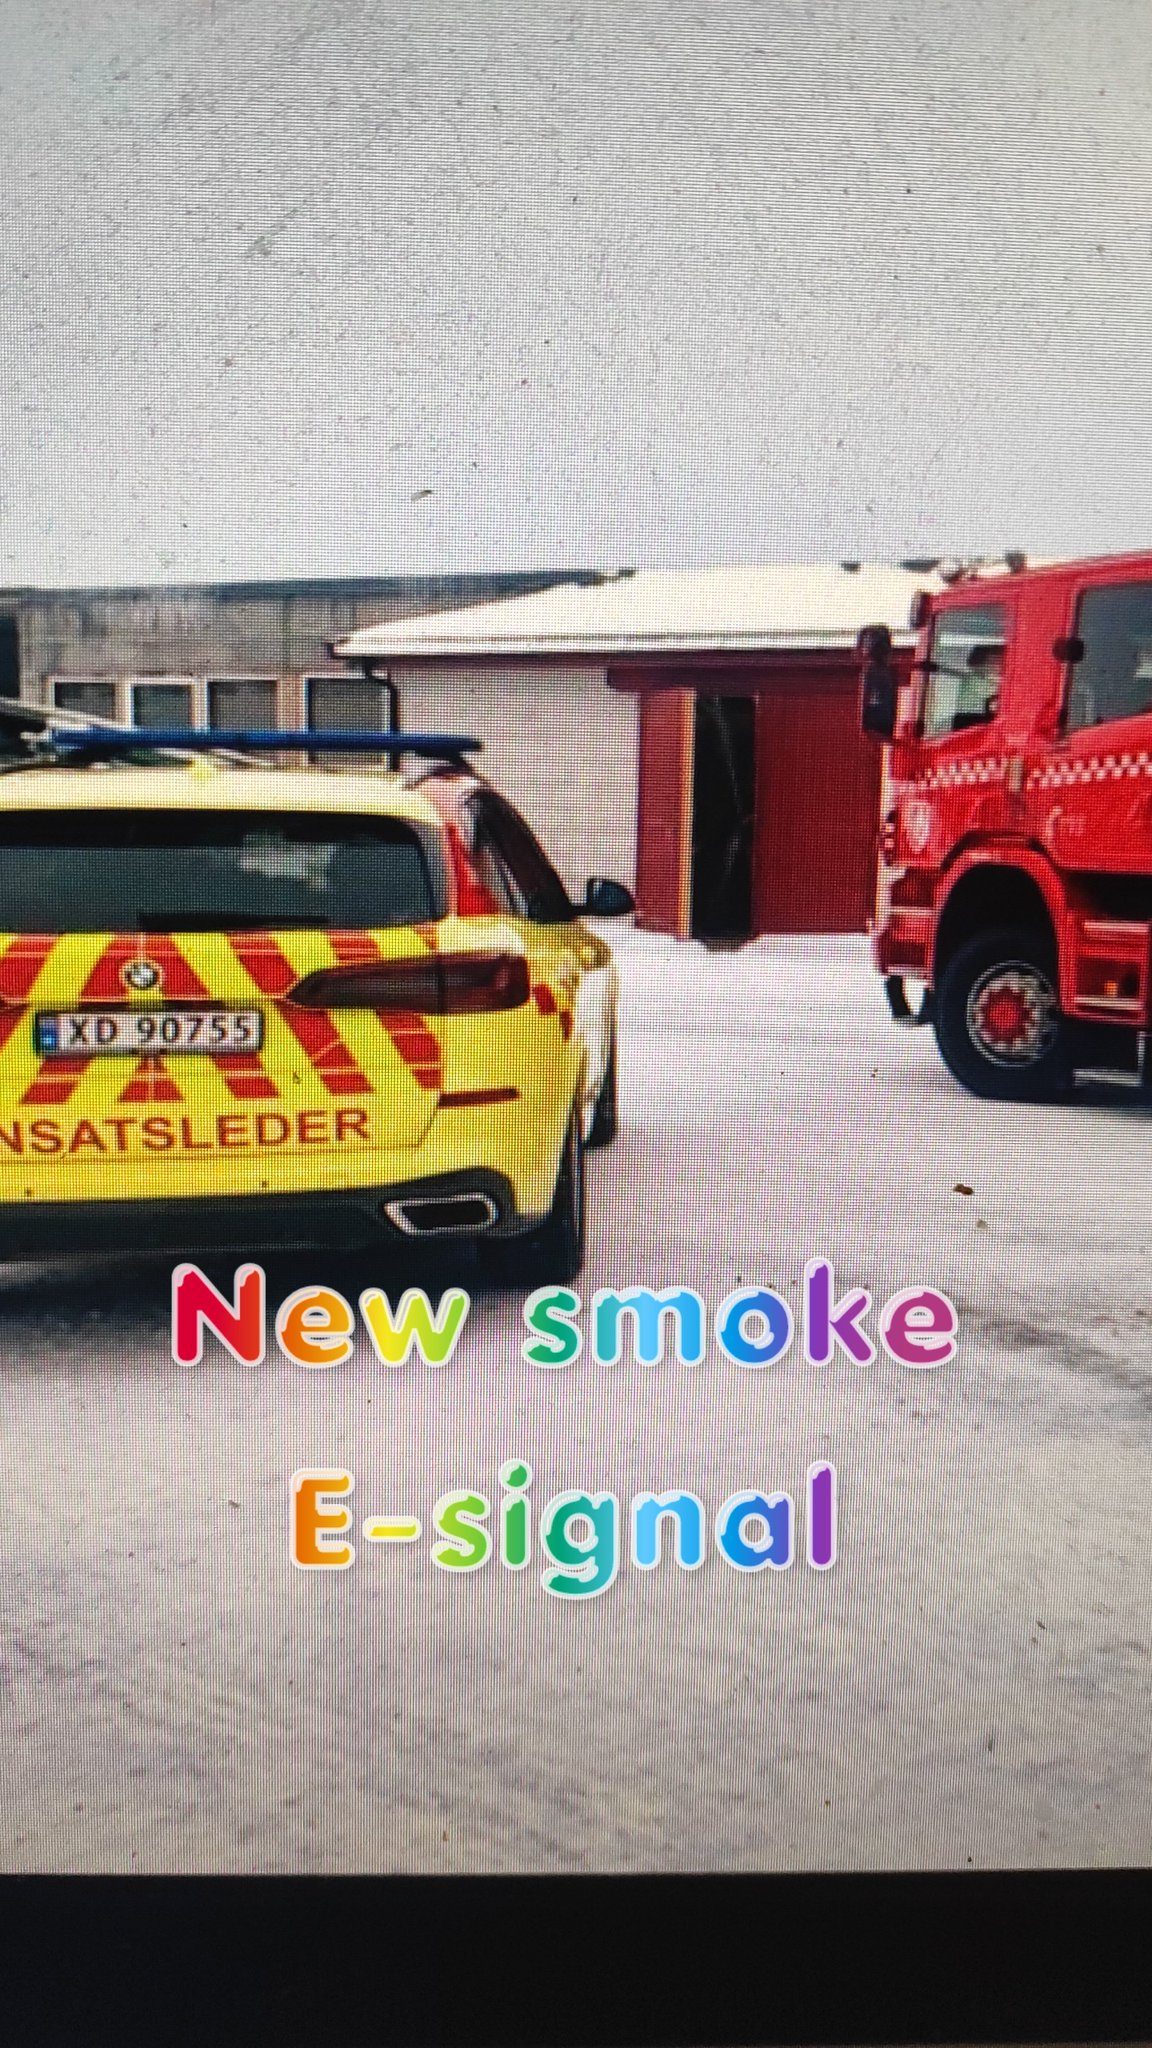 new smoke esignal about about wecare where dissapear and was killed.